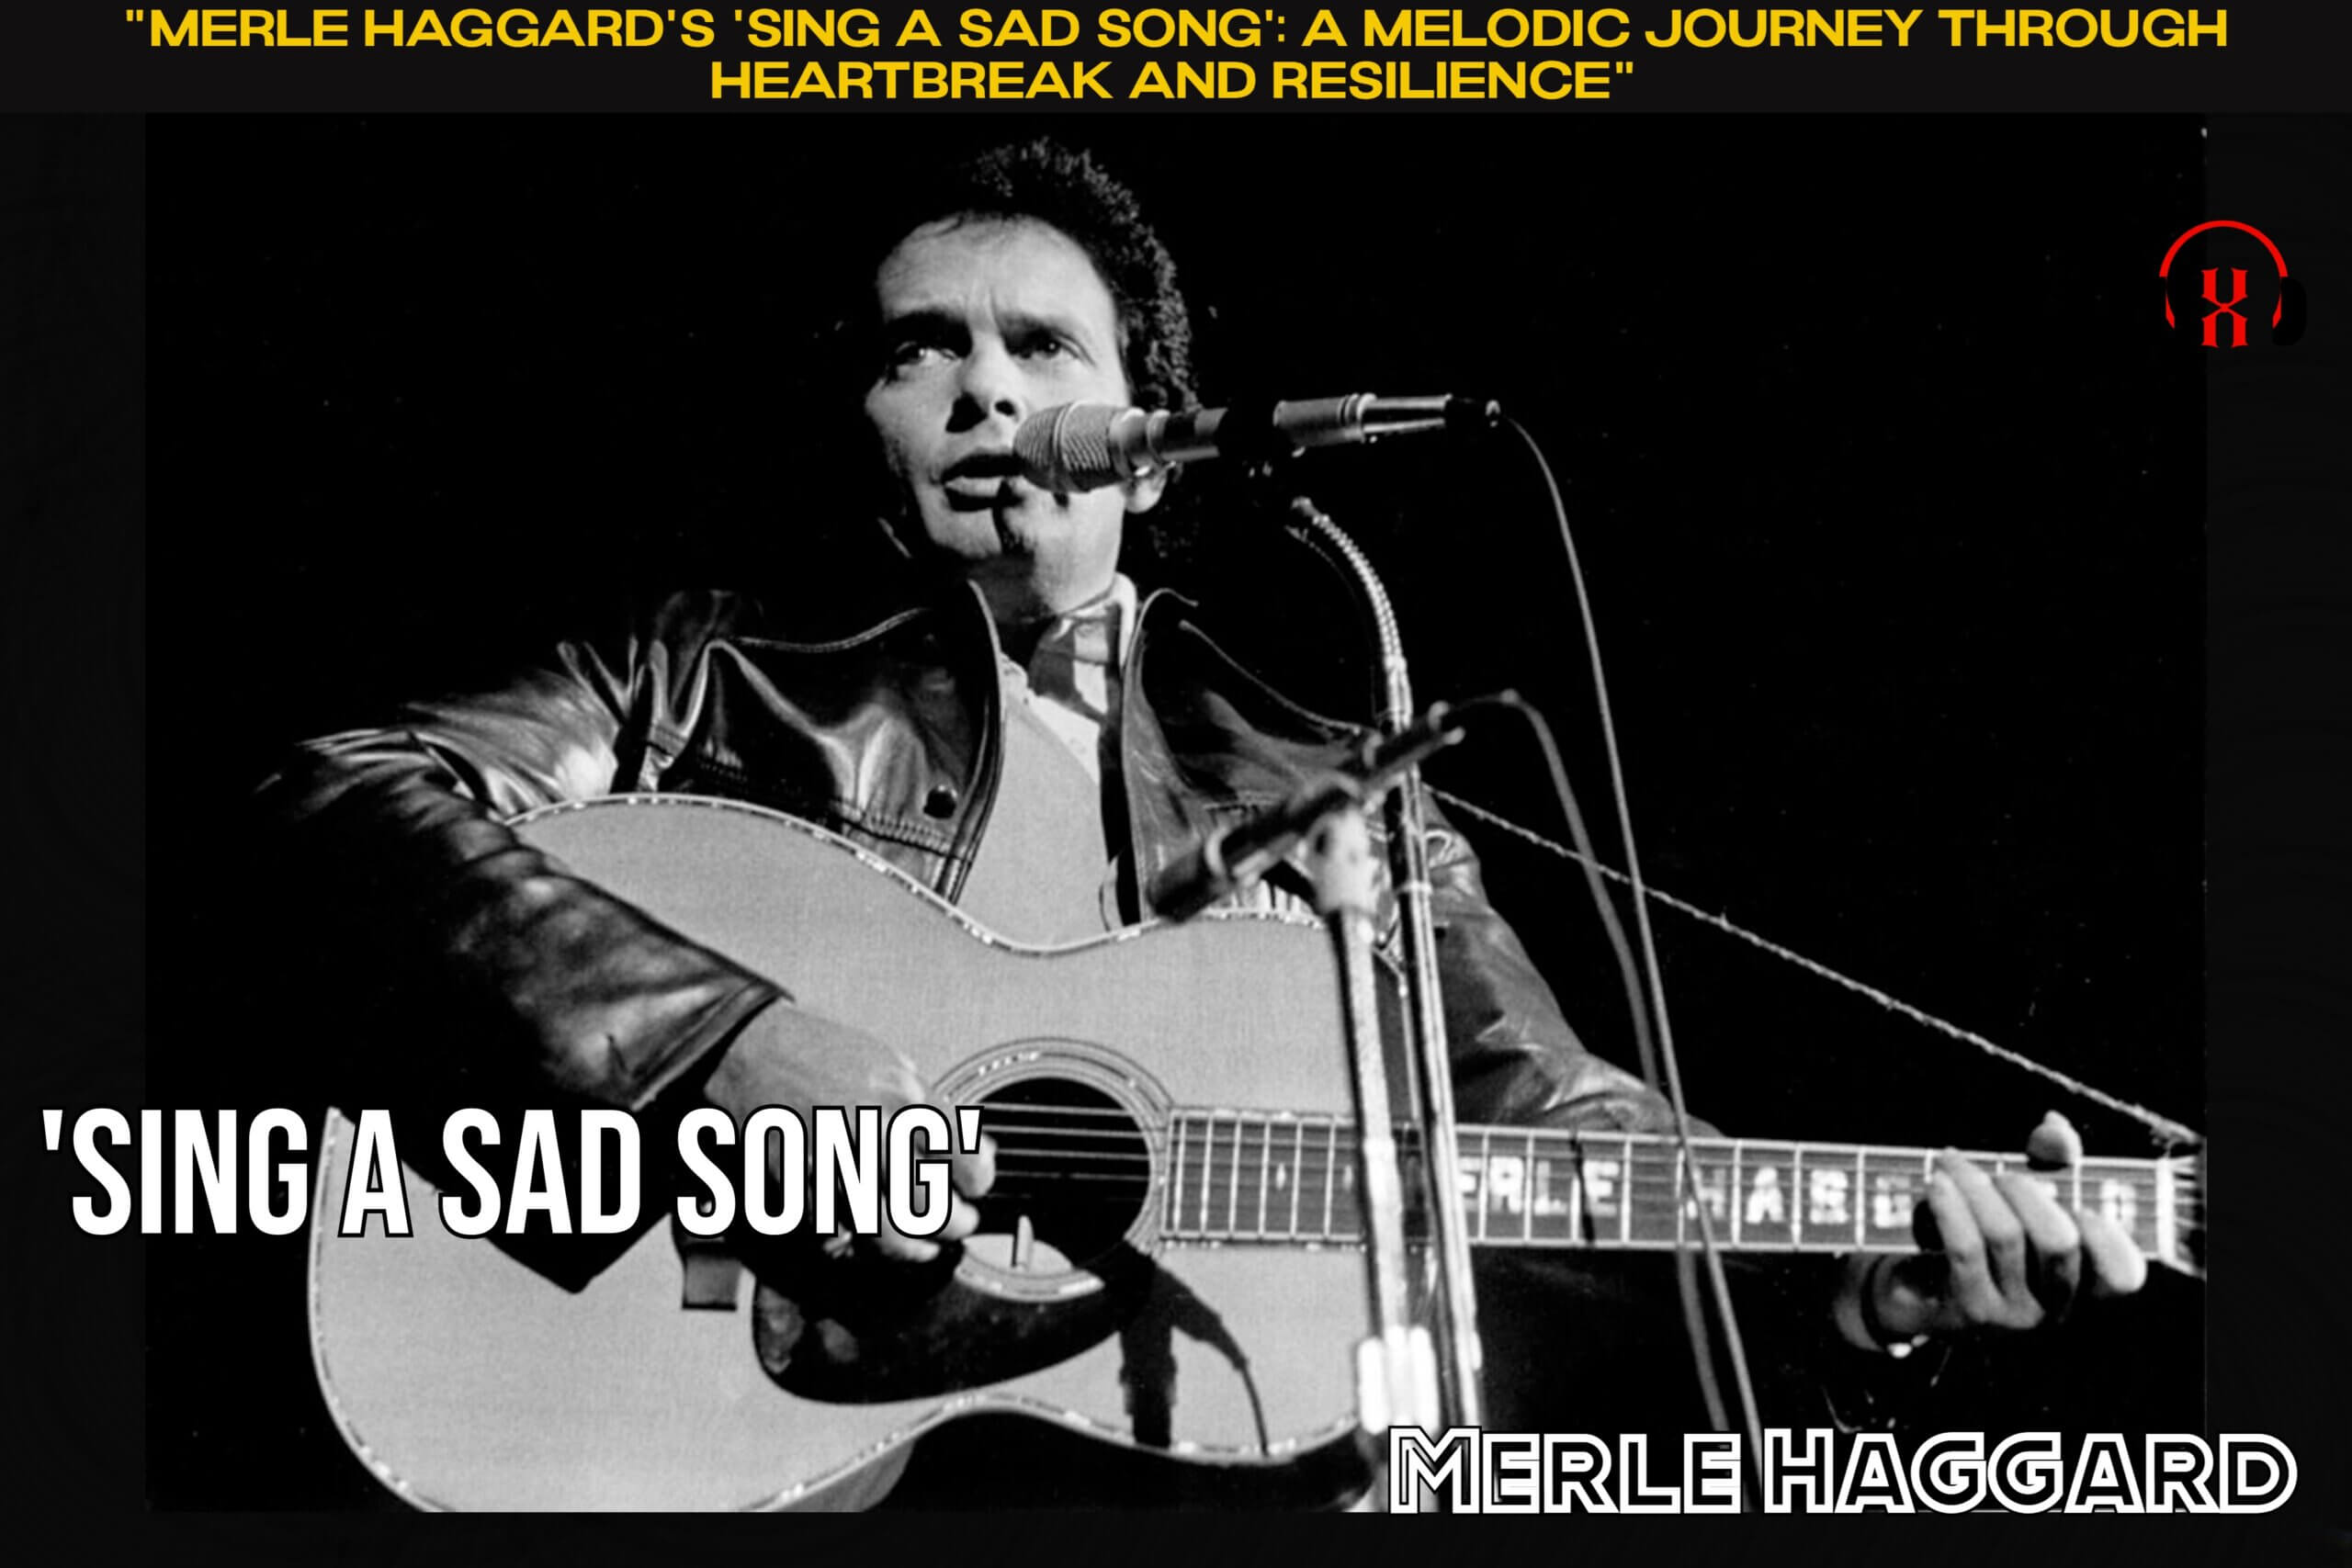 "Merle Haggard's 'Sing a Sad Song': A Melodic Journey through Heartbreak and Resilience"